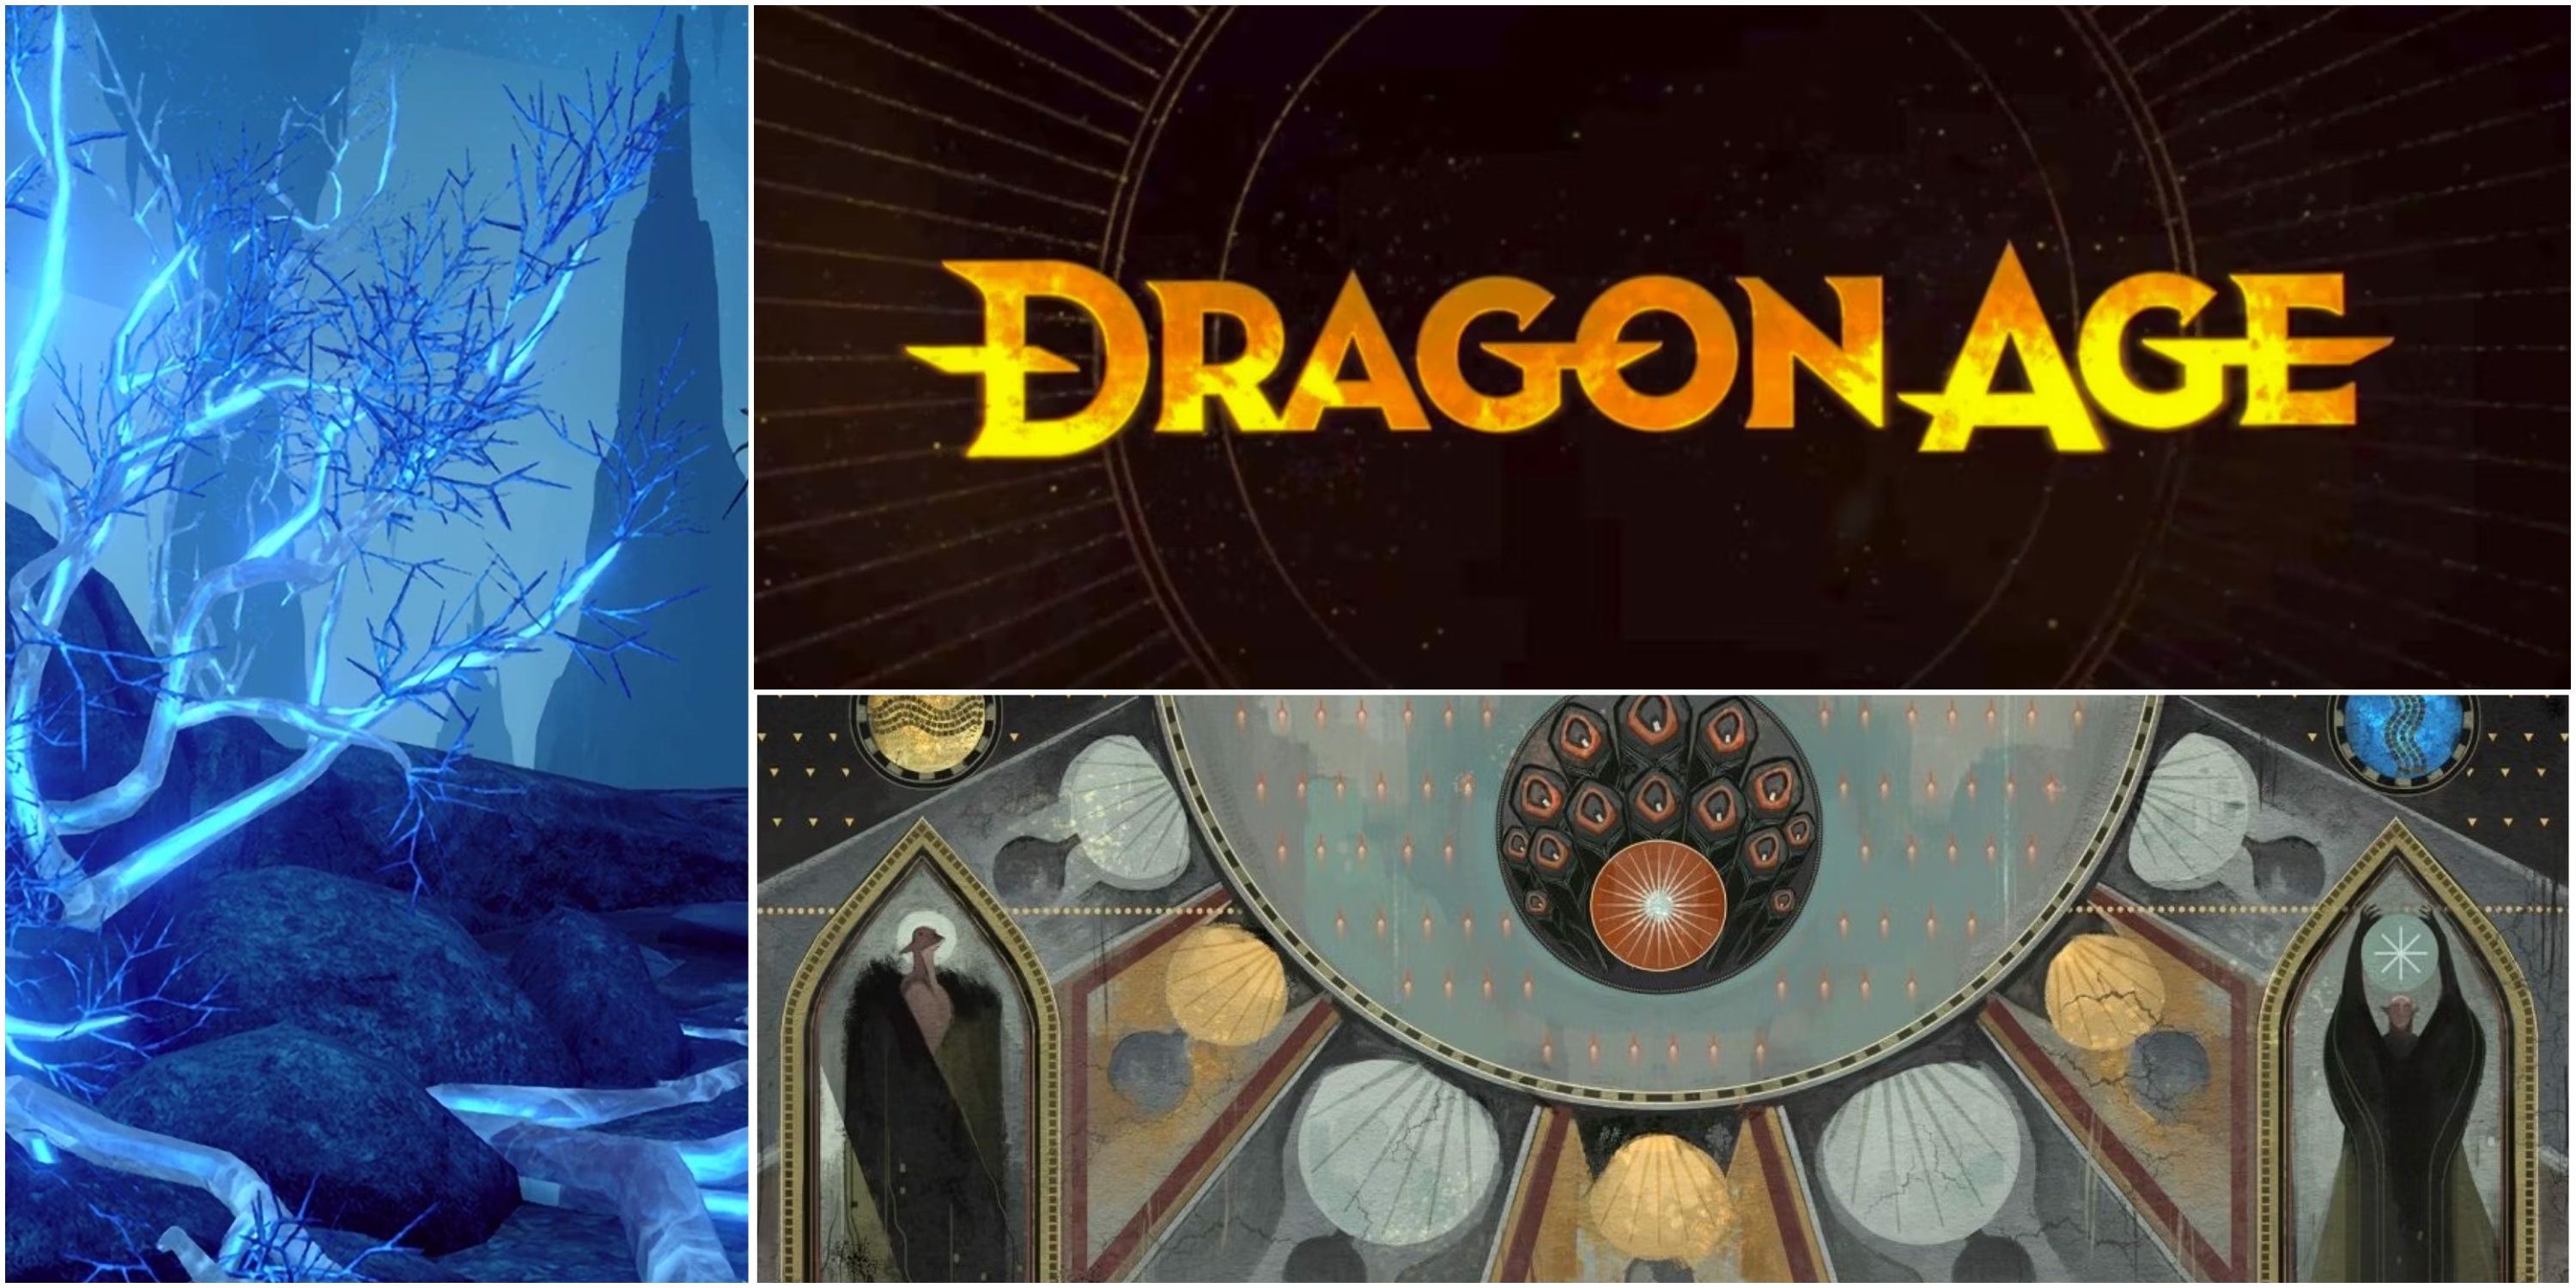 A split image featuring the Dragon Age logo, a blue environment, and a stain glass window